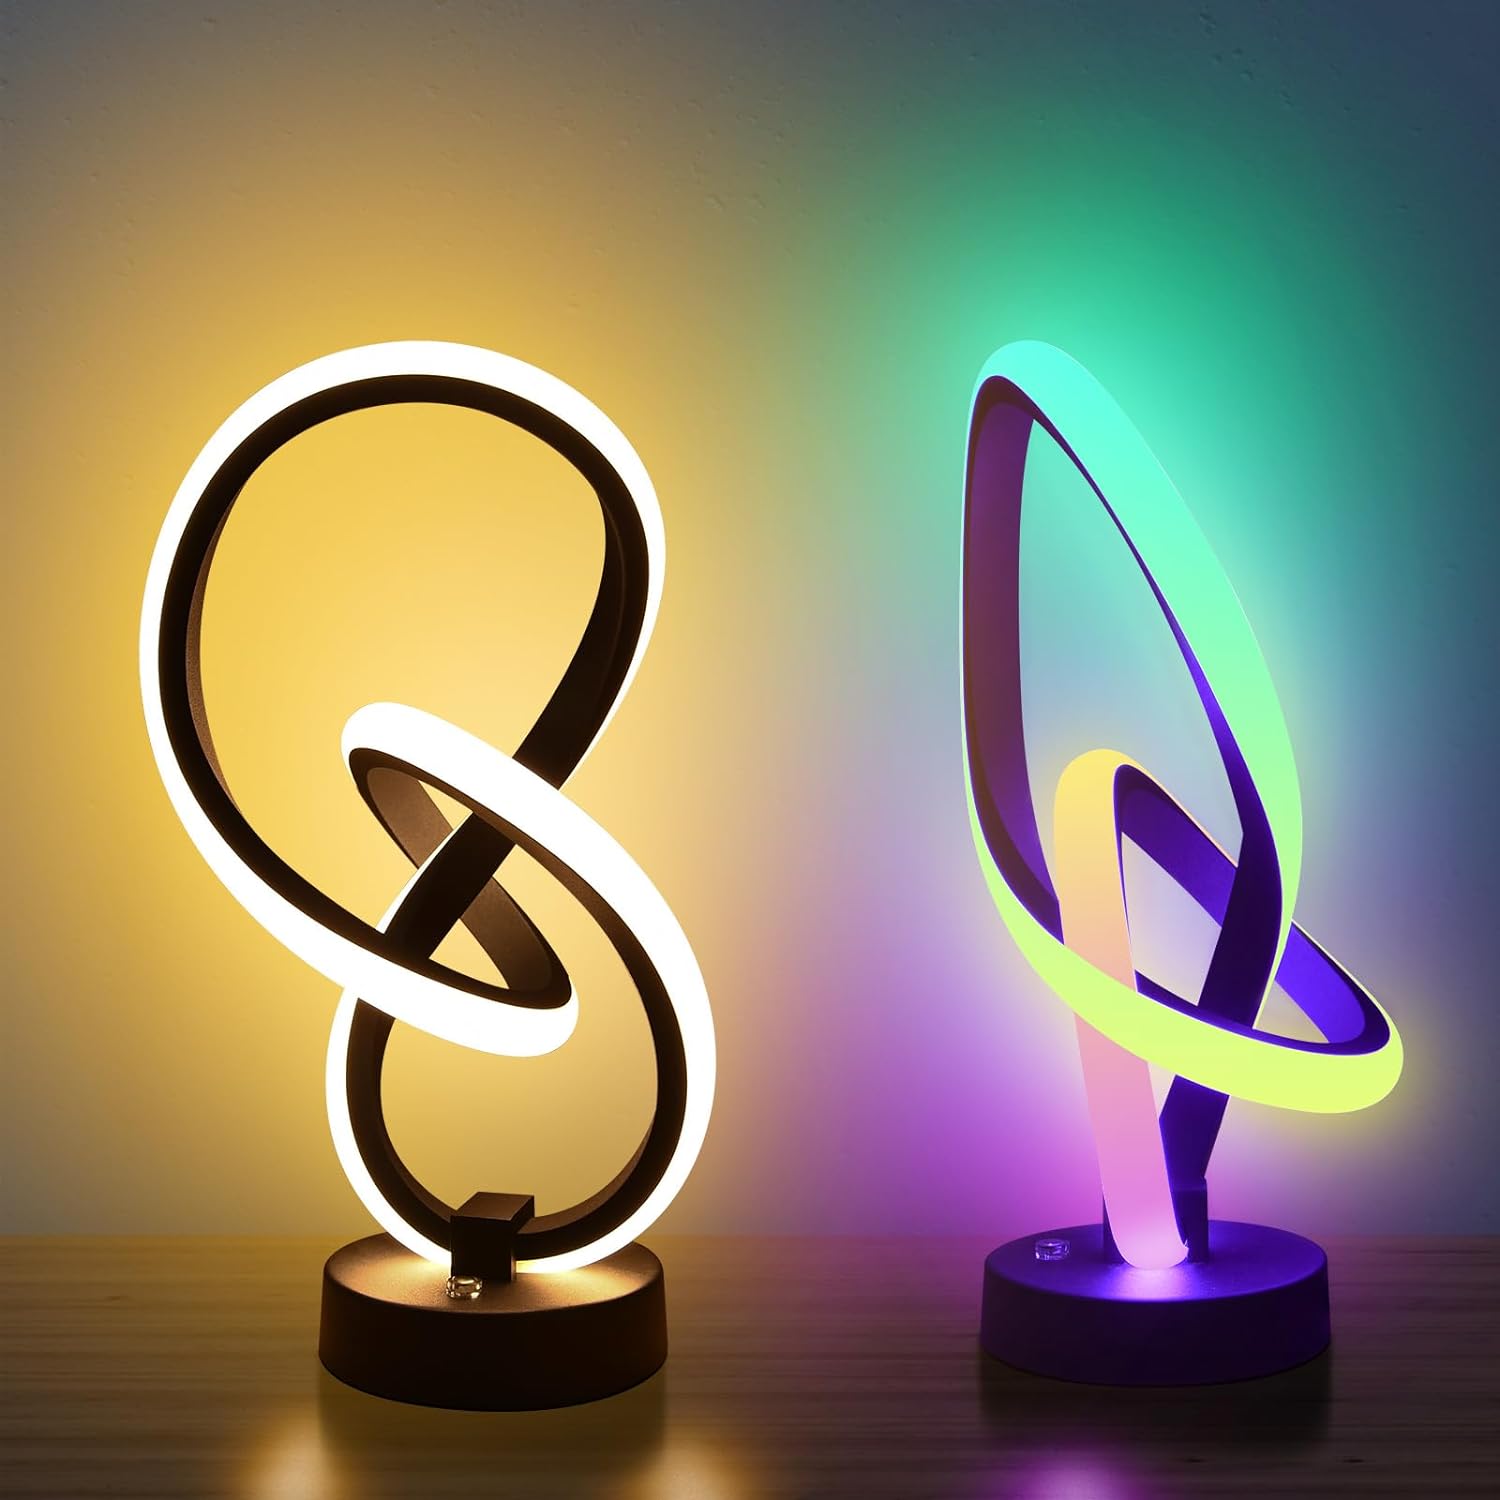 Vocevos Modern Table Lamps 11'' Funky RGB Desk Lamp Spiral,Ambient Bedside Lamp Touch Cool Led Lamps for Living Room 3-Way Dimmable 10 Modes,Unique Nightstand Lamps Gifts